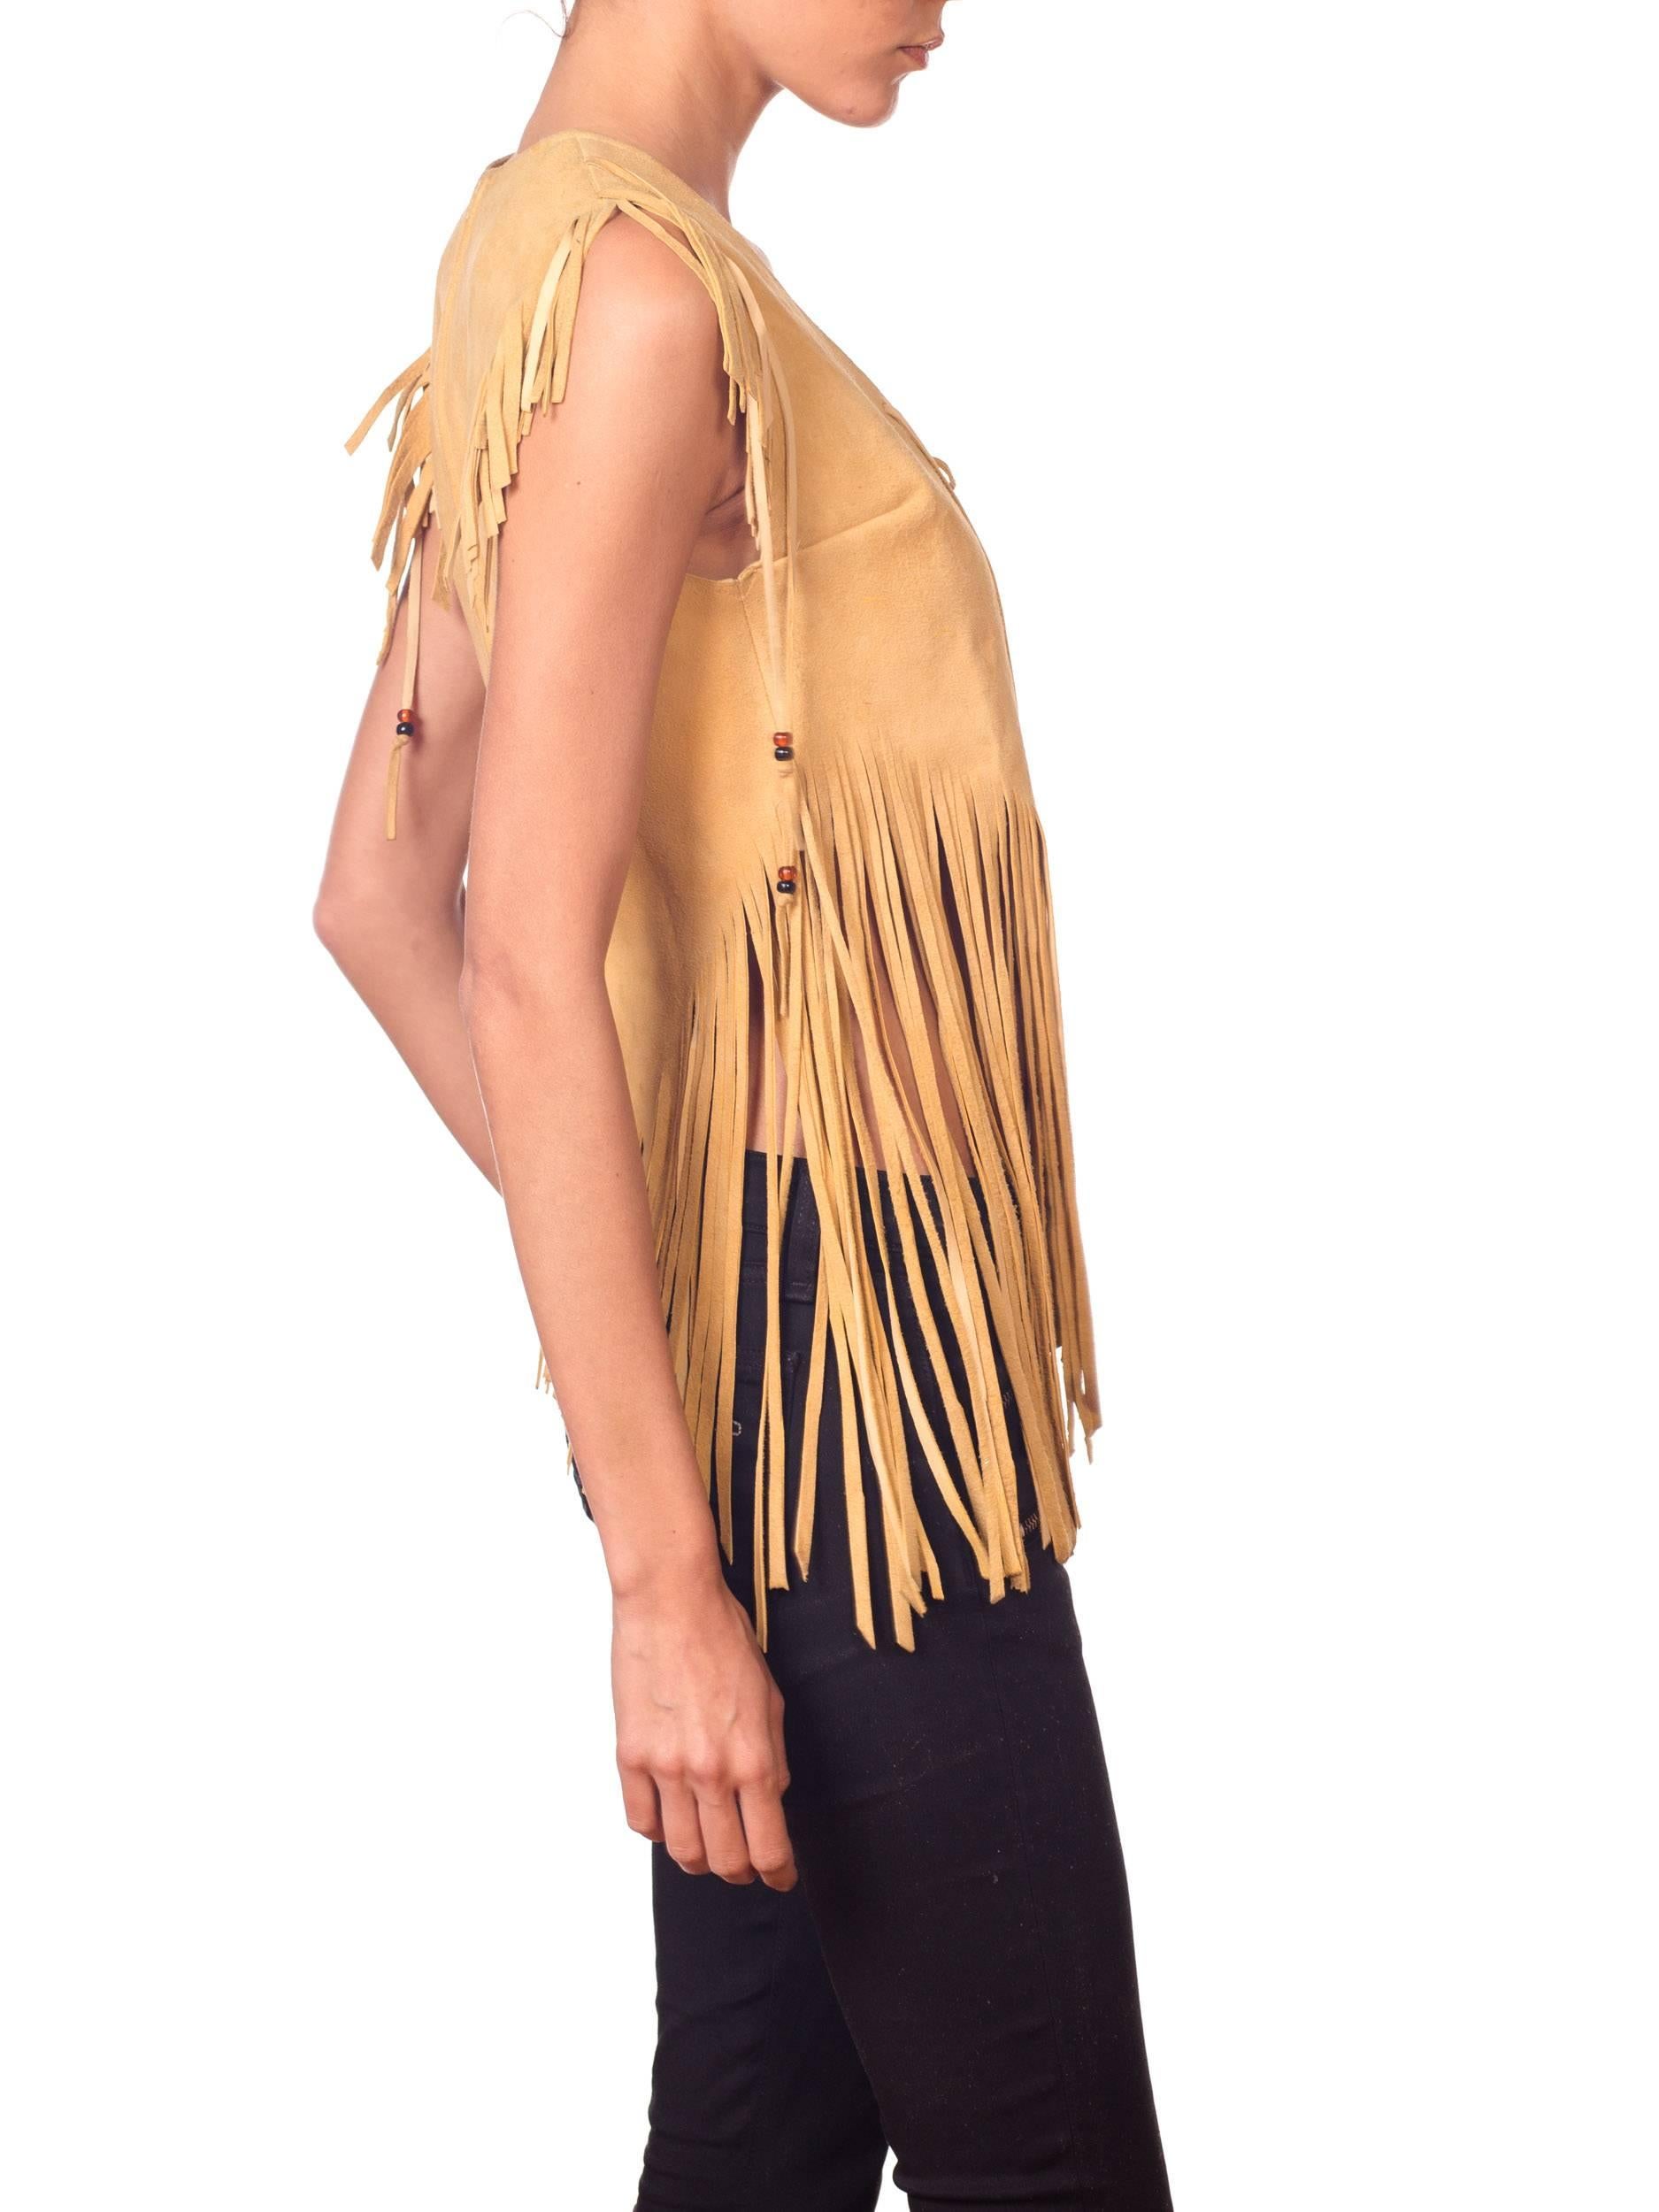 Women's 1970S Yellow Tan Suede Leather Beaded Fringe Lace Up Crop Tops Shirt